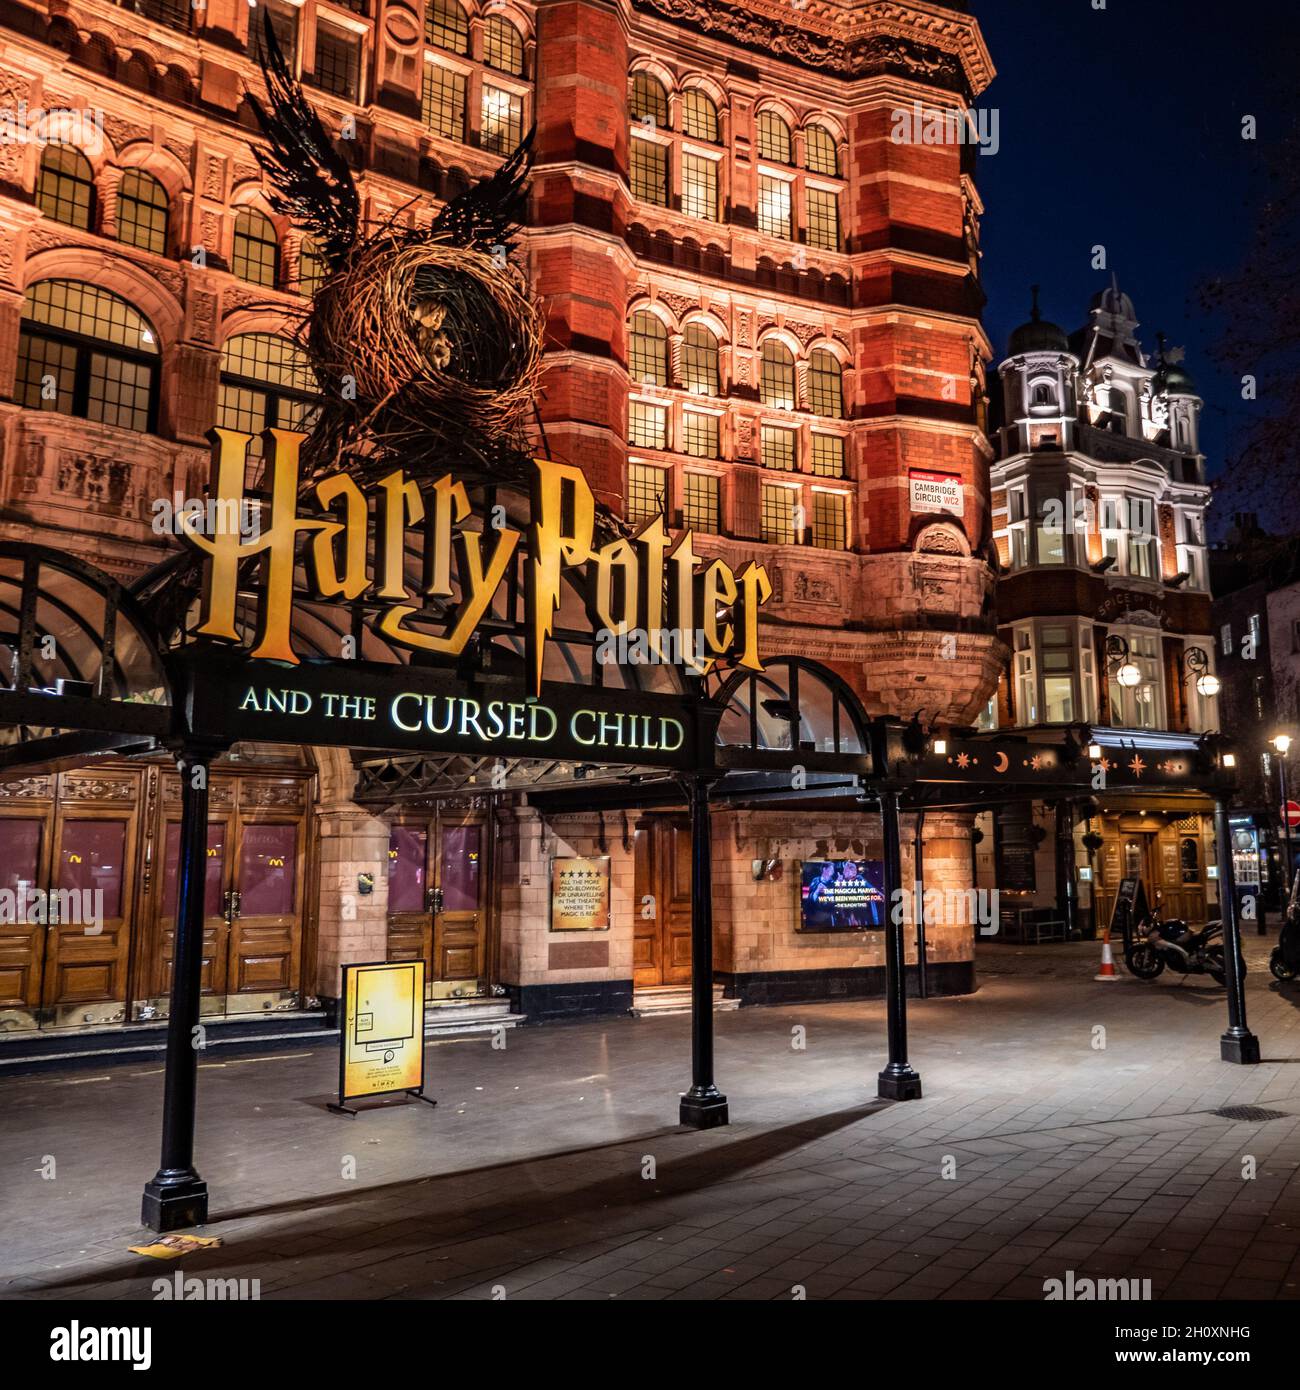 The Palace Theatre, London. Harry Potter and the Cursed Child in production at the popular West End theatre. Stock Photo